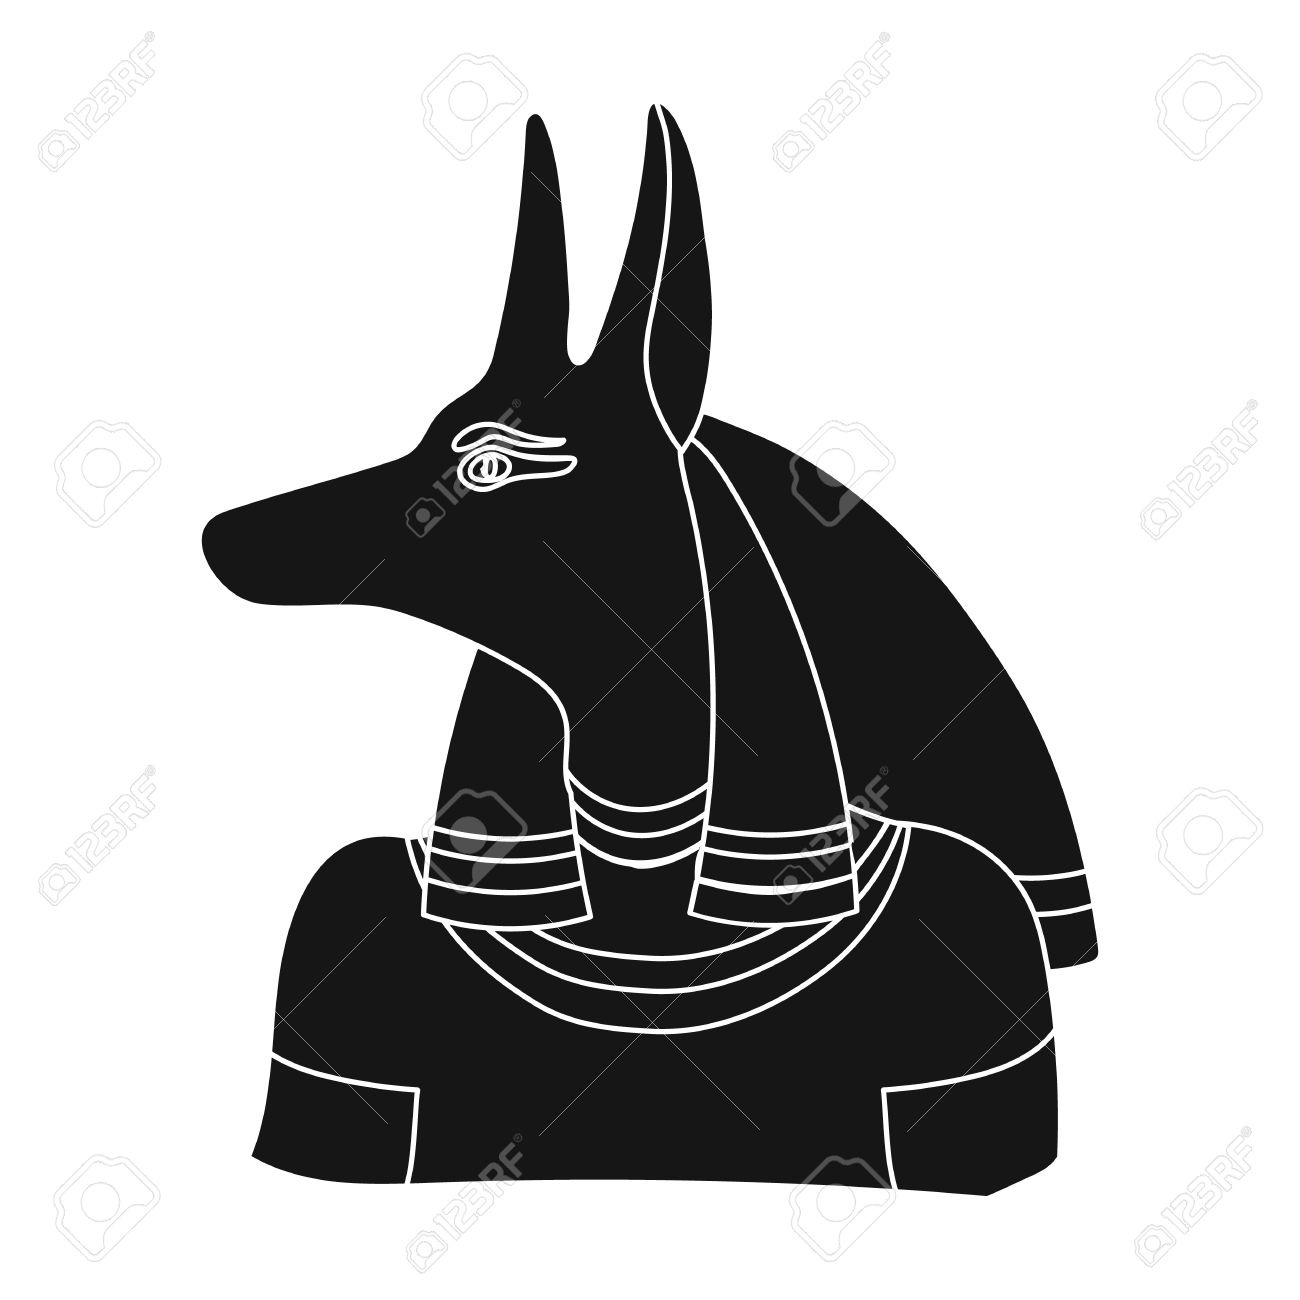 Anubis Icon In Black Style Isolated On White Background Ancient